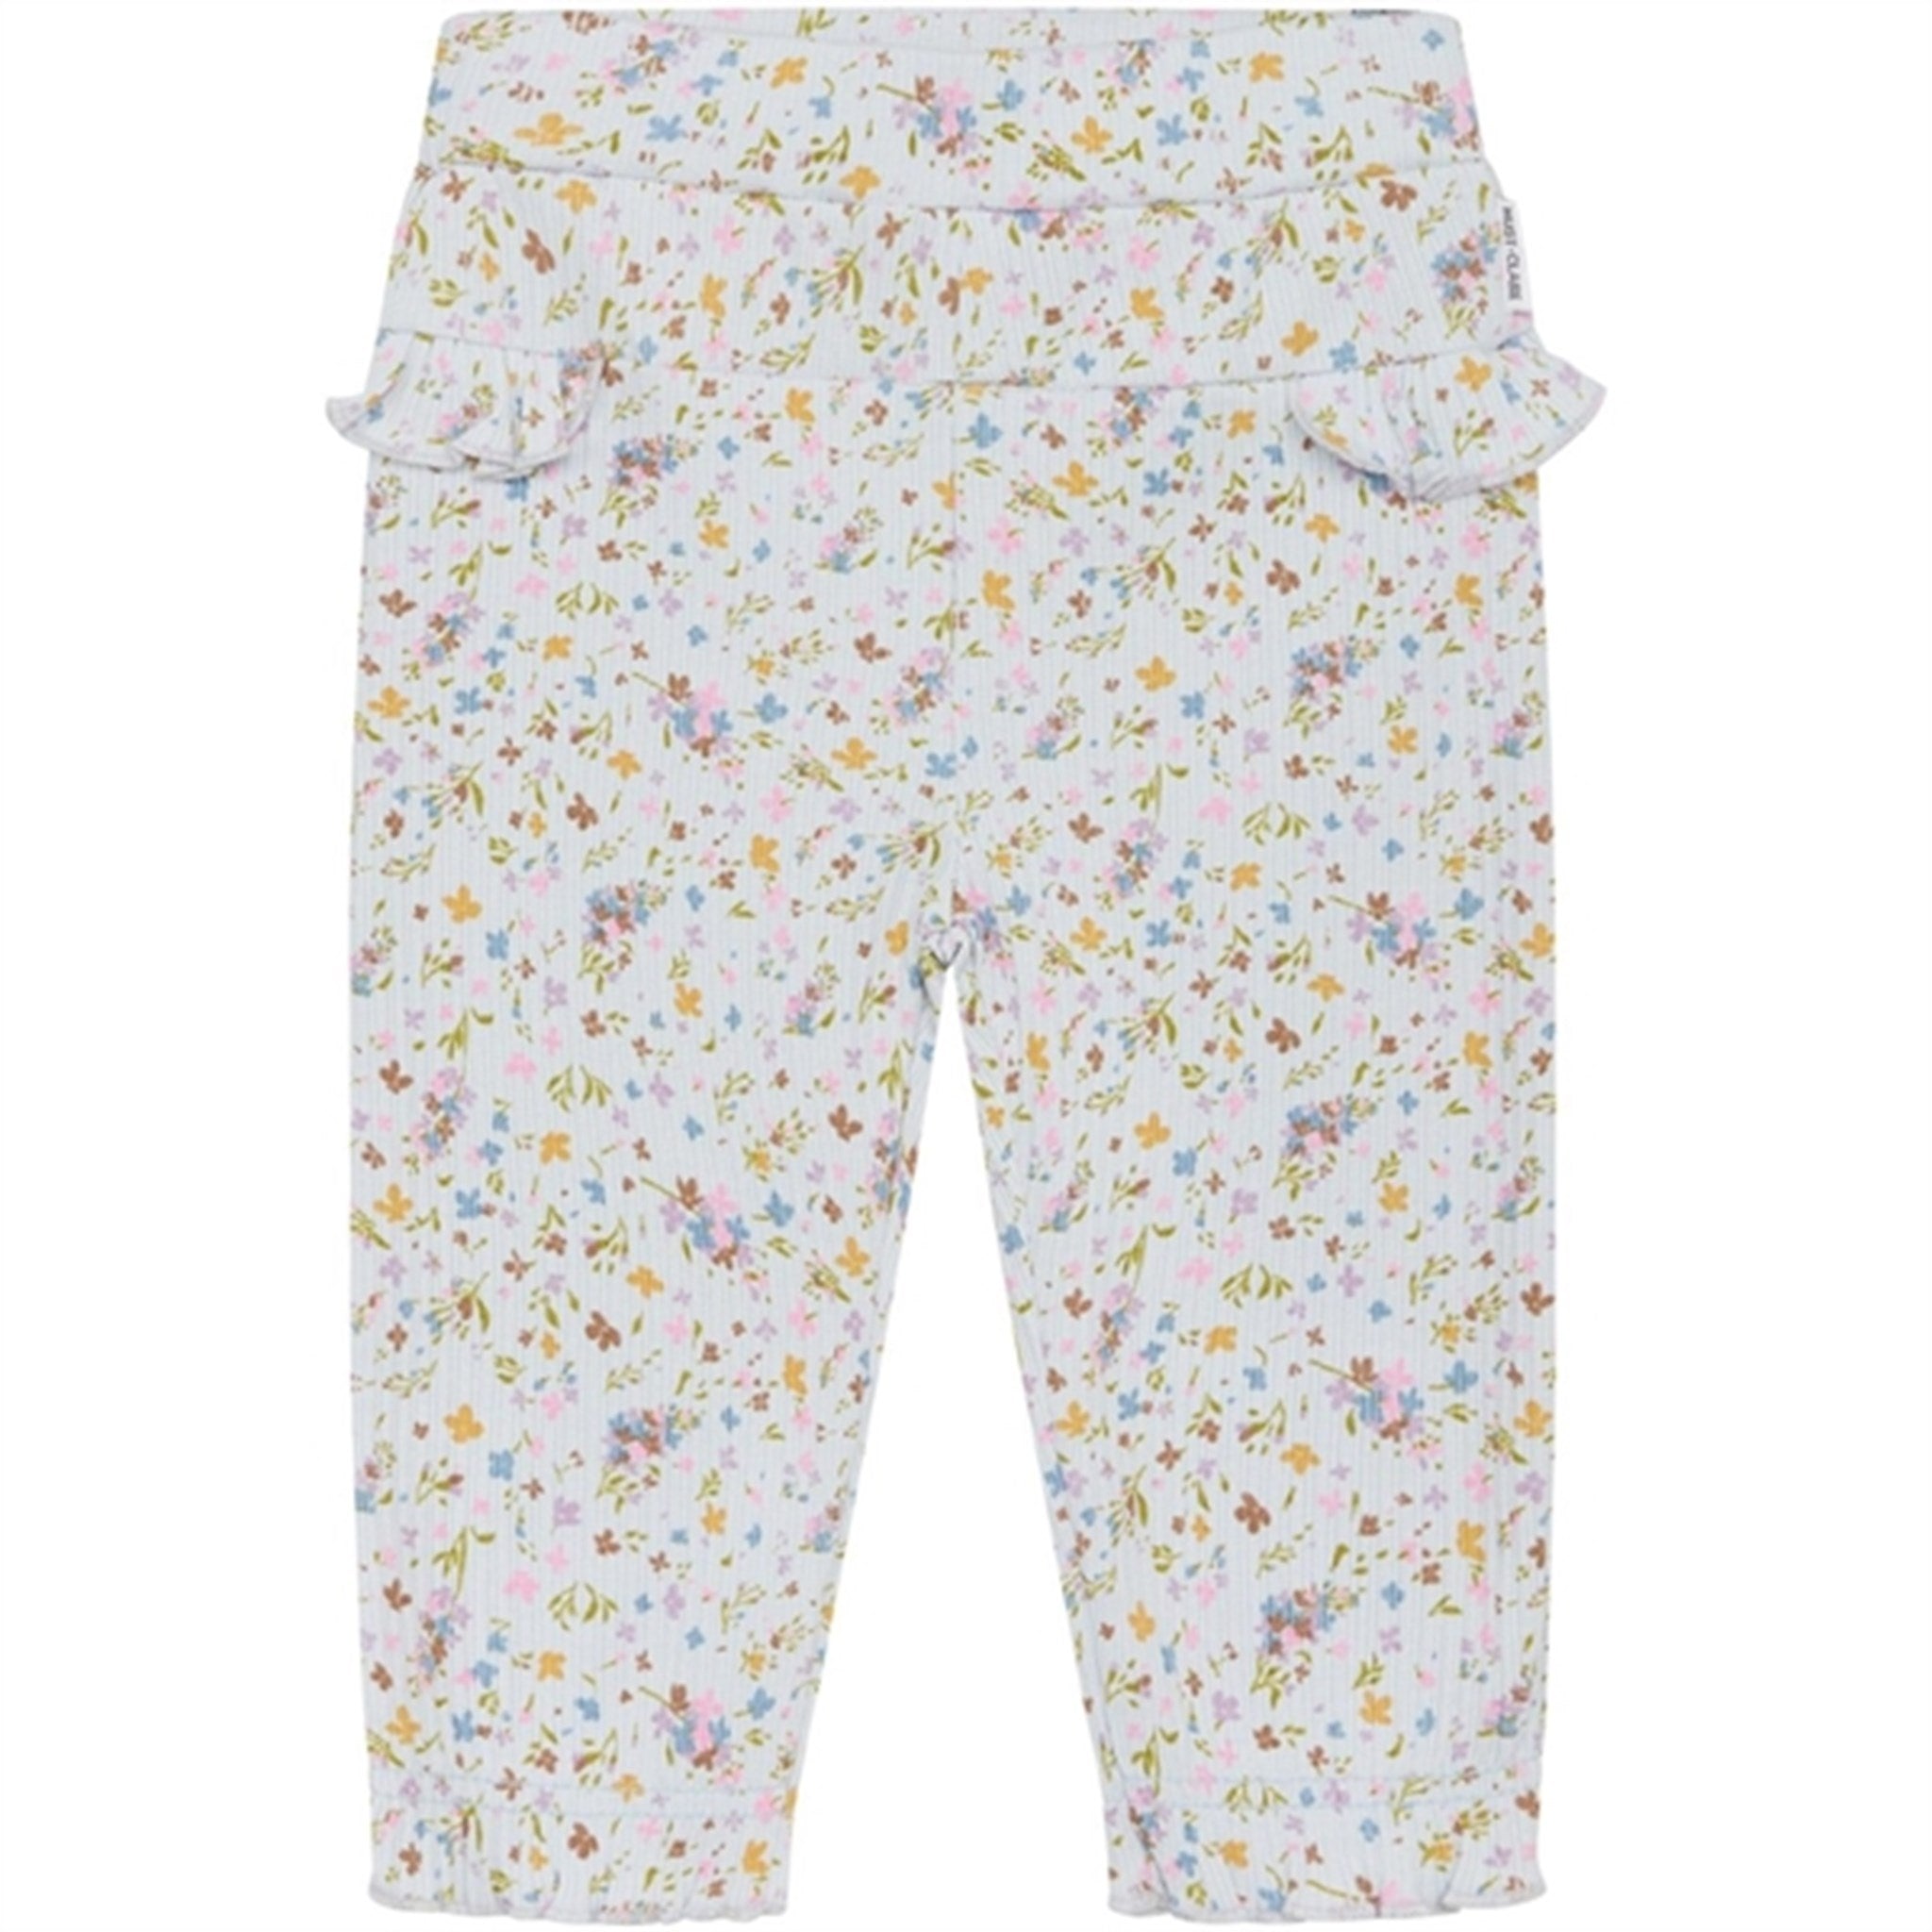 Hust & Claire Water Genny Sweatpants